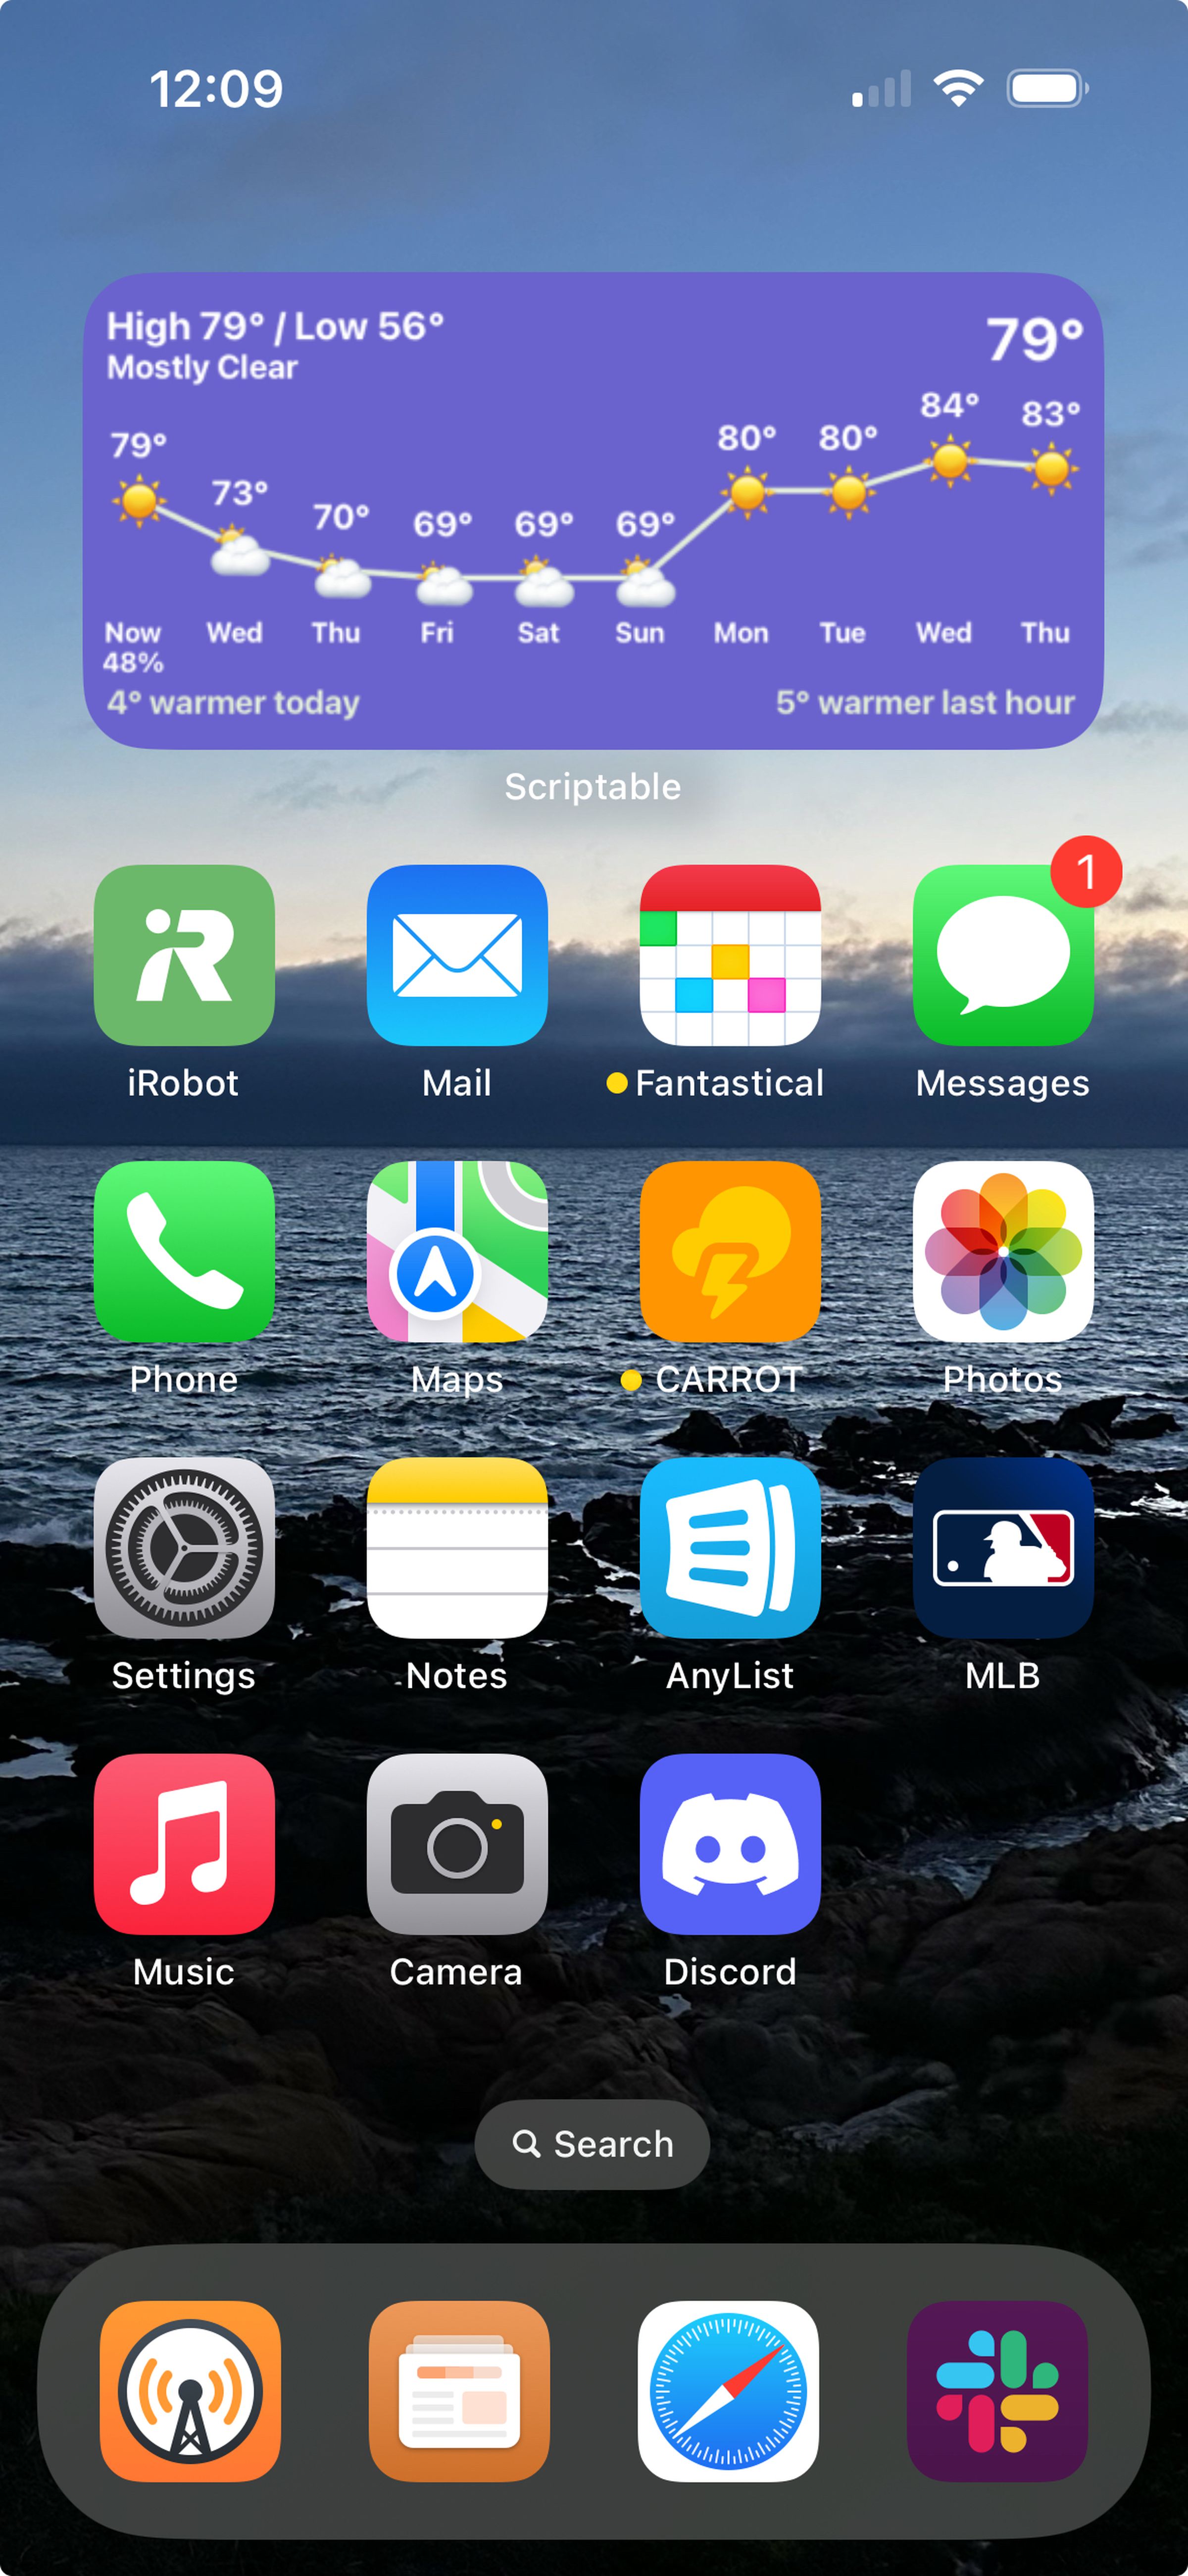 An iPhone home screen with a wallpaper showing a beach.